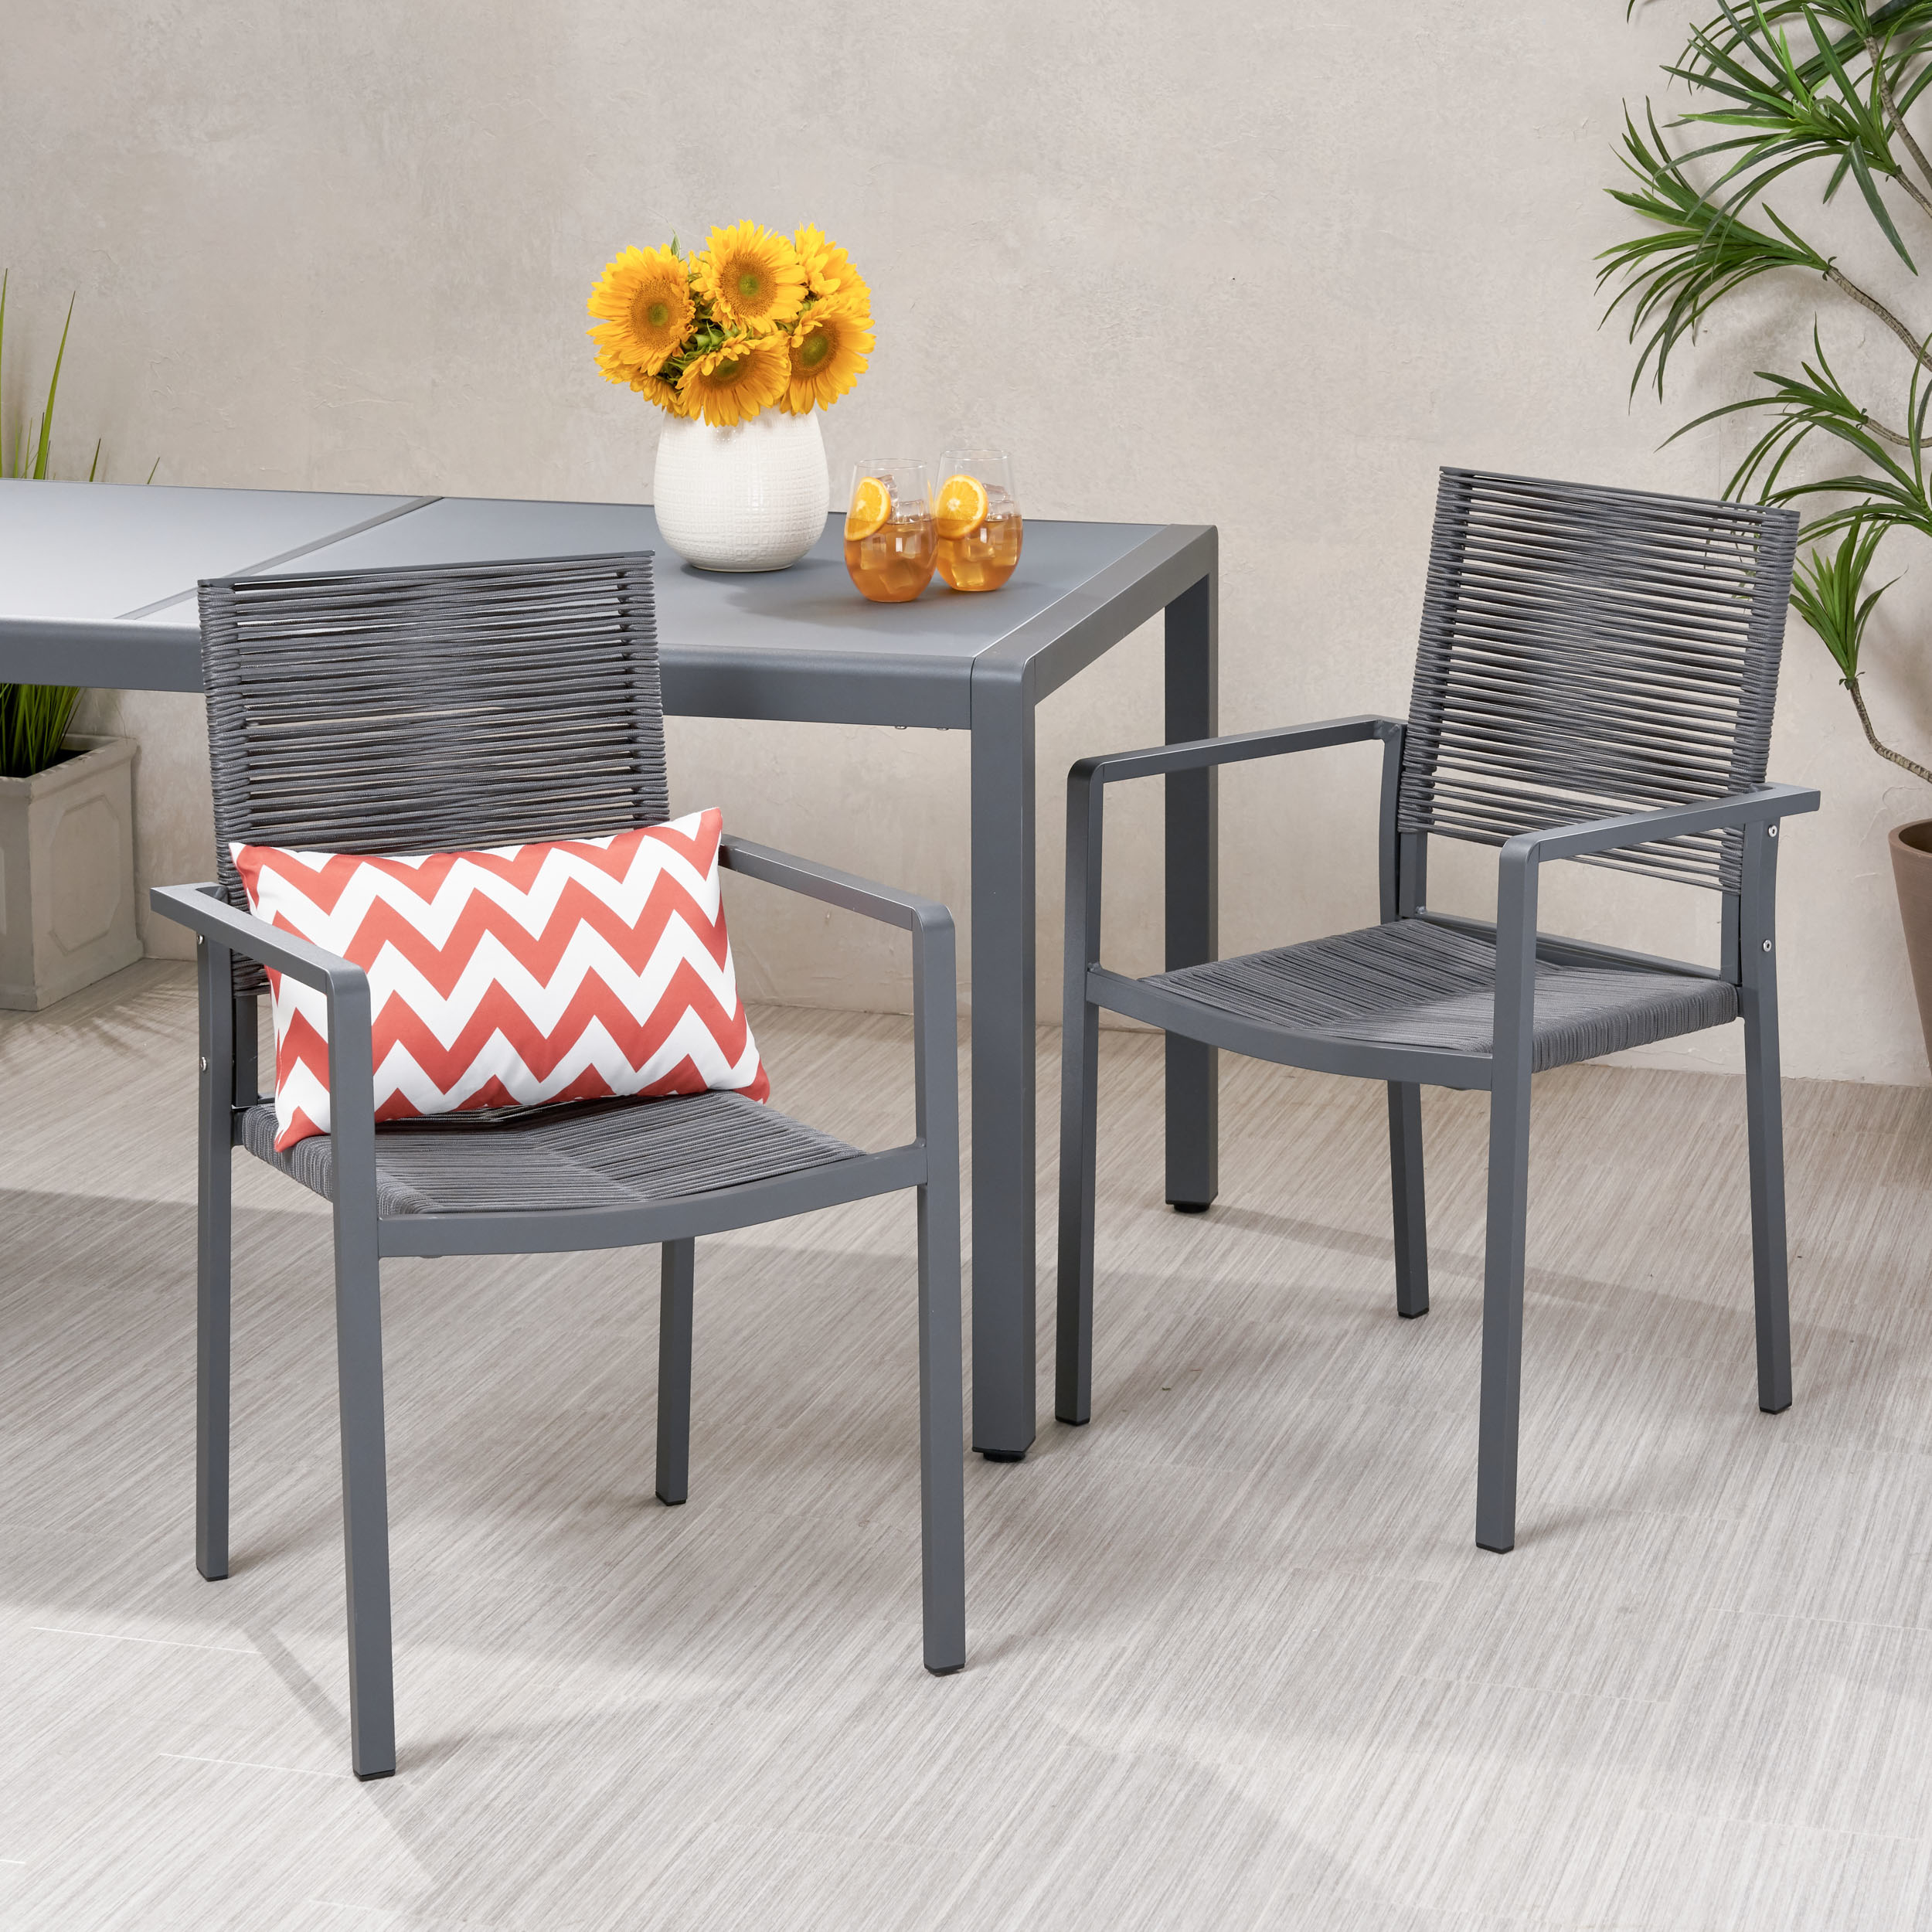 Jean Outdoor Modern Aluminum Dining Chair With Rope Seat (Set Of 2) - Dark Gray + Black